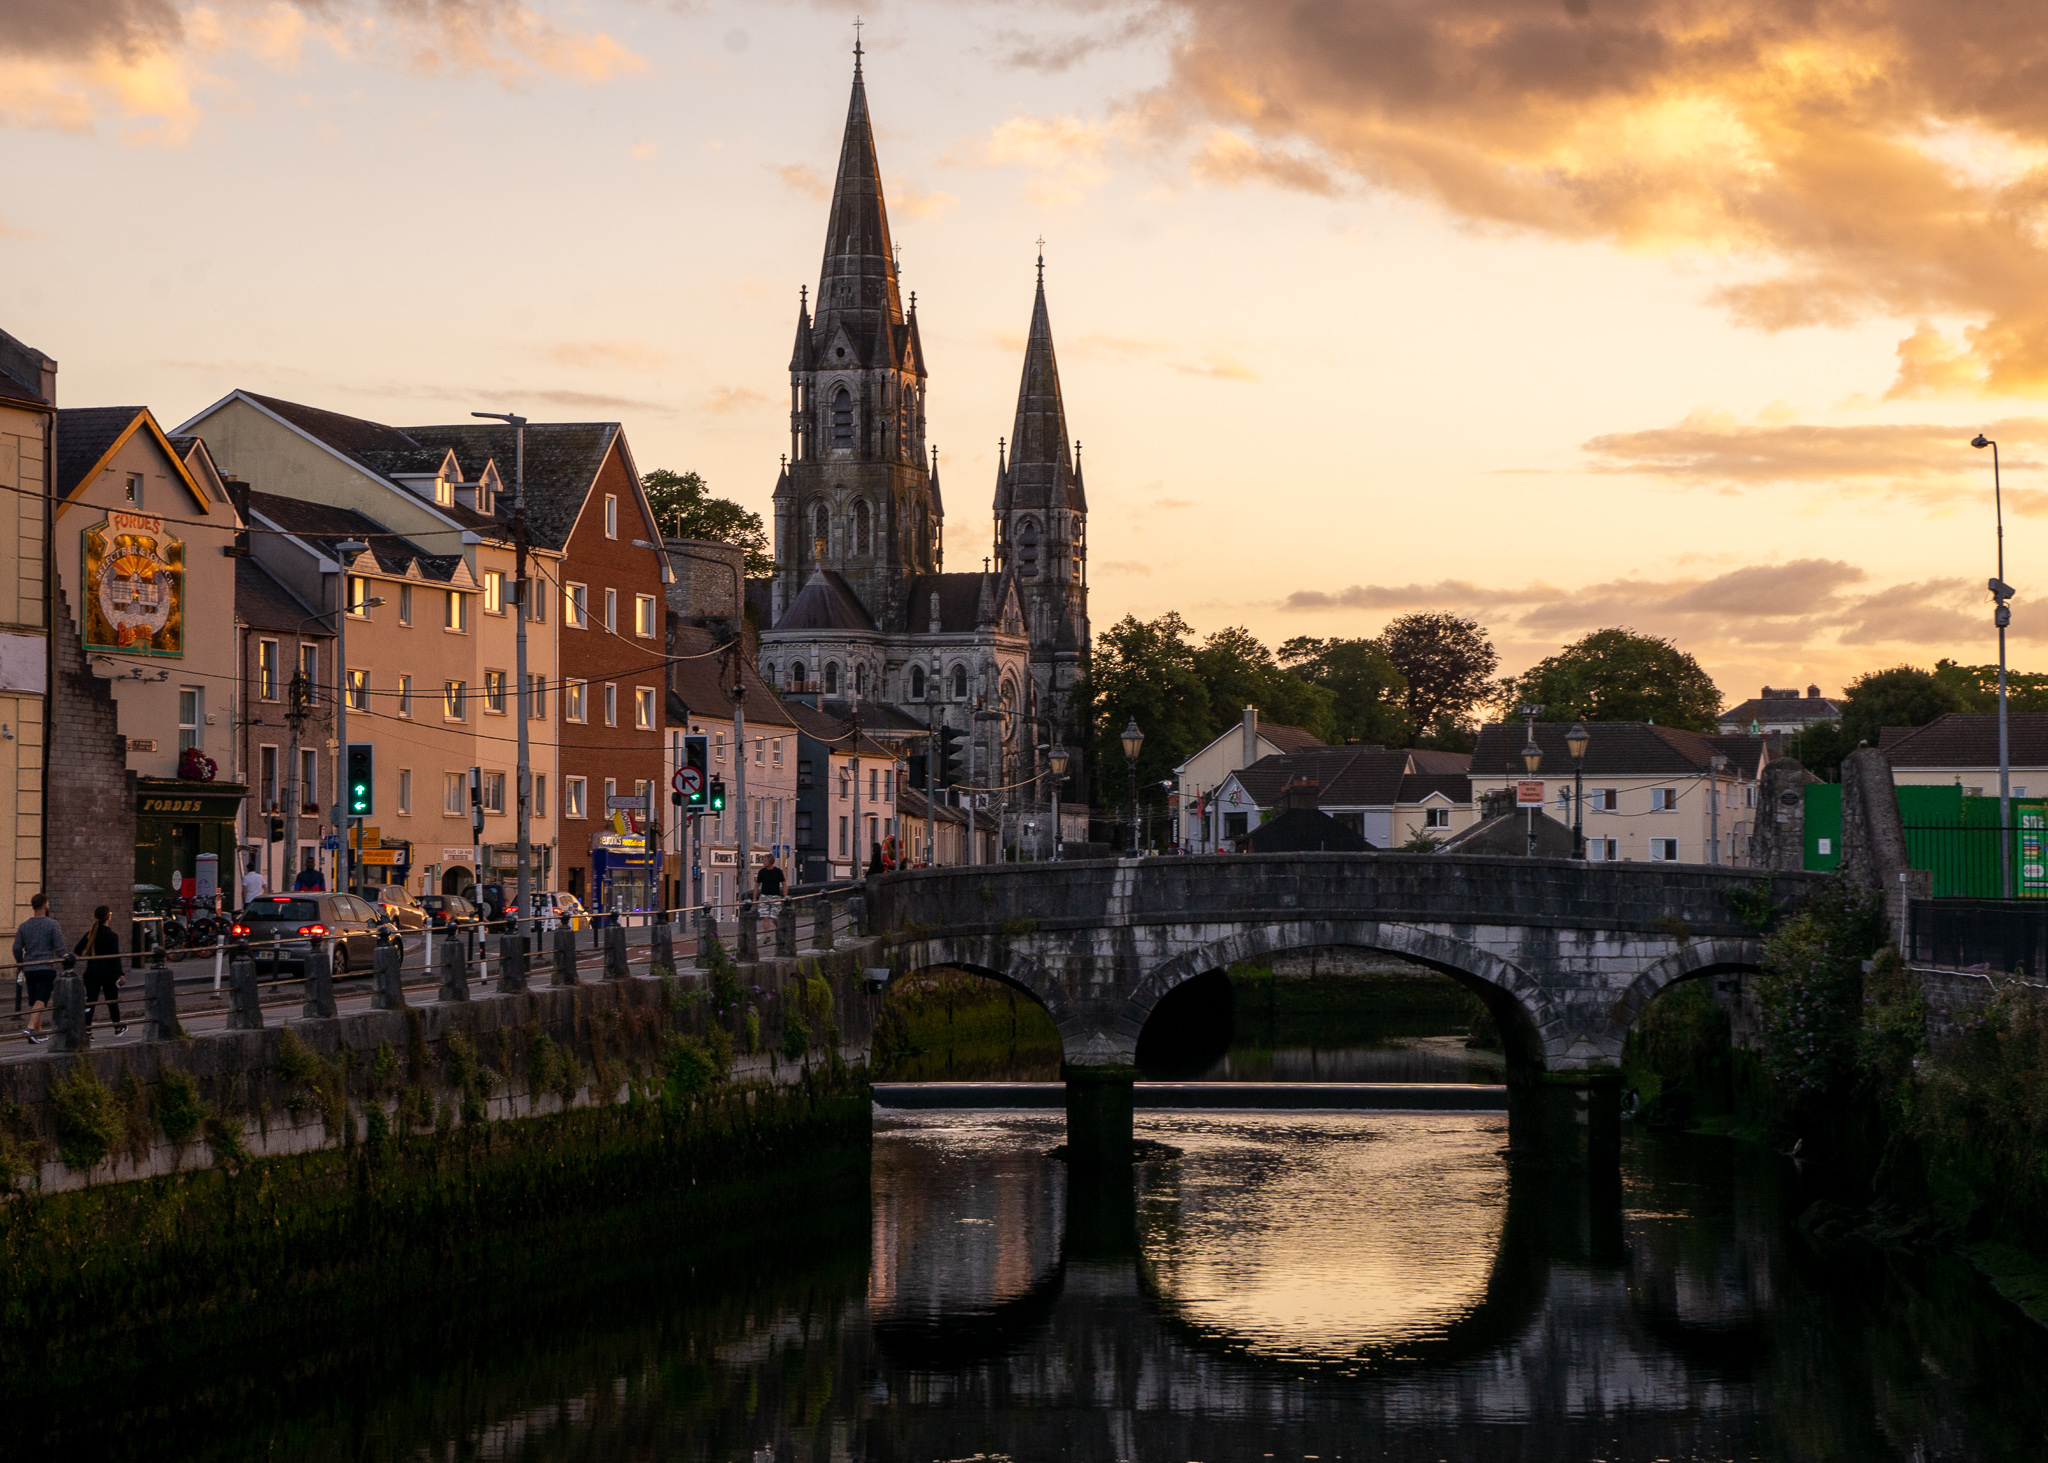 a view of cork, ireland at sunset with the church towers and stone bridge 